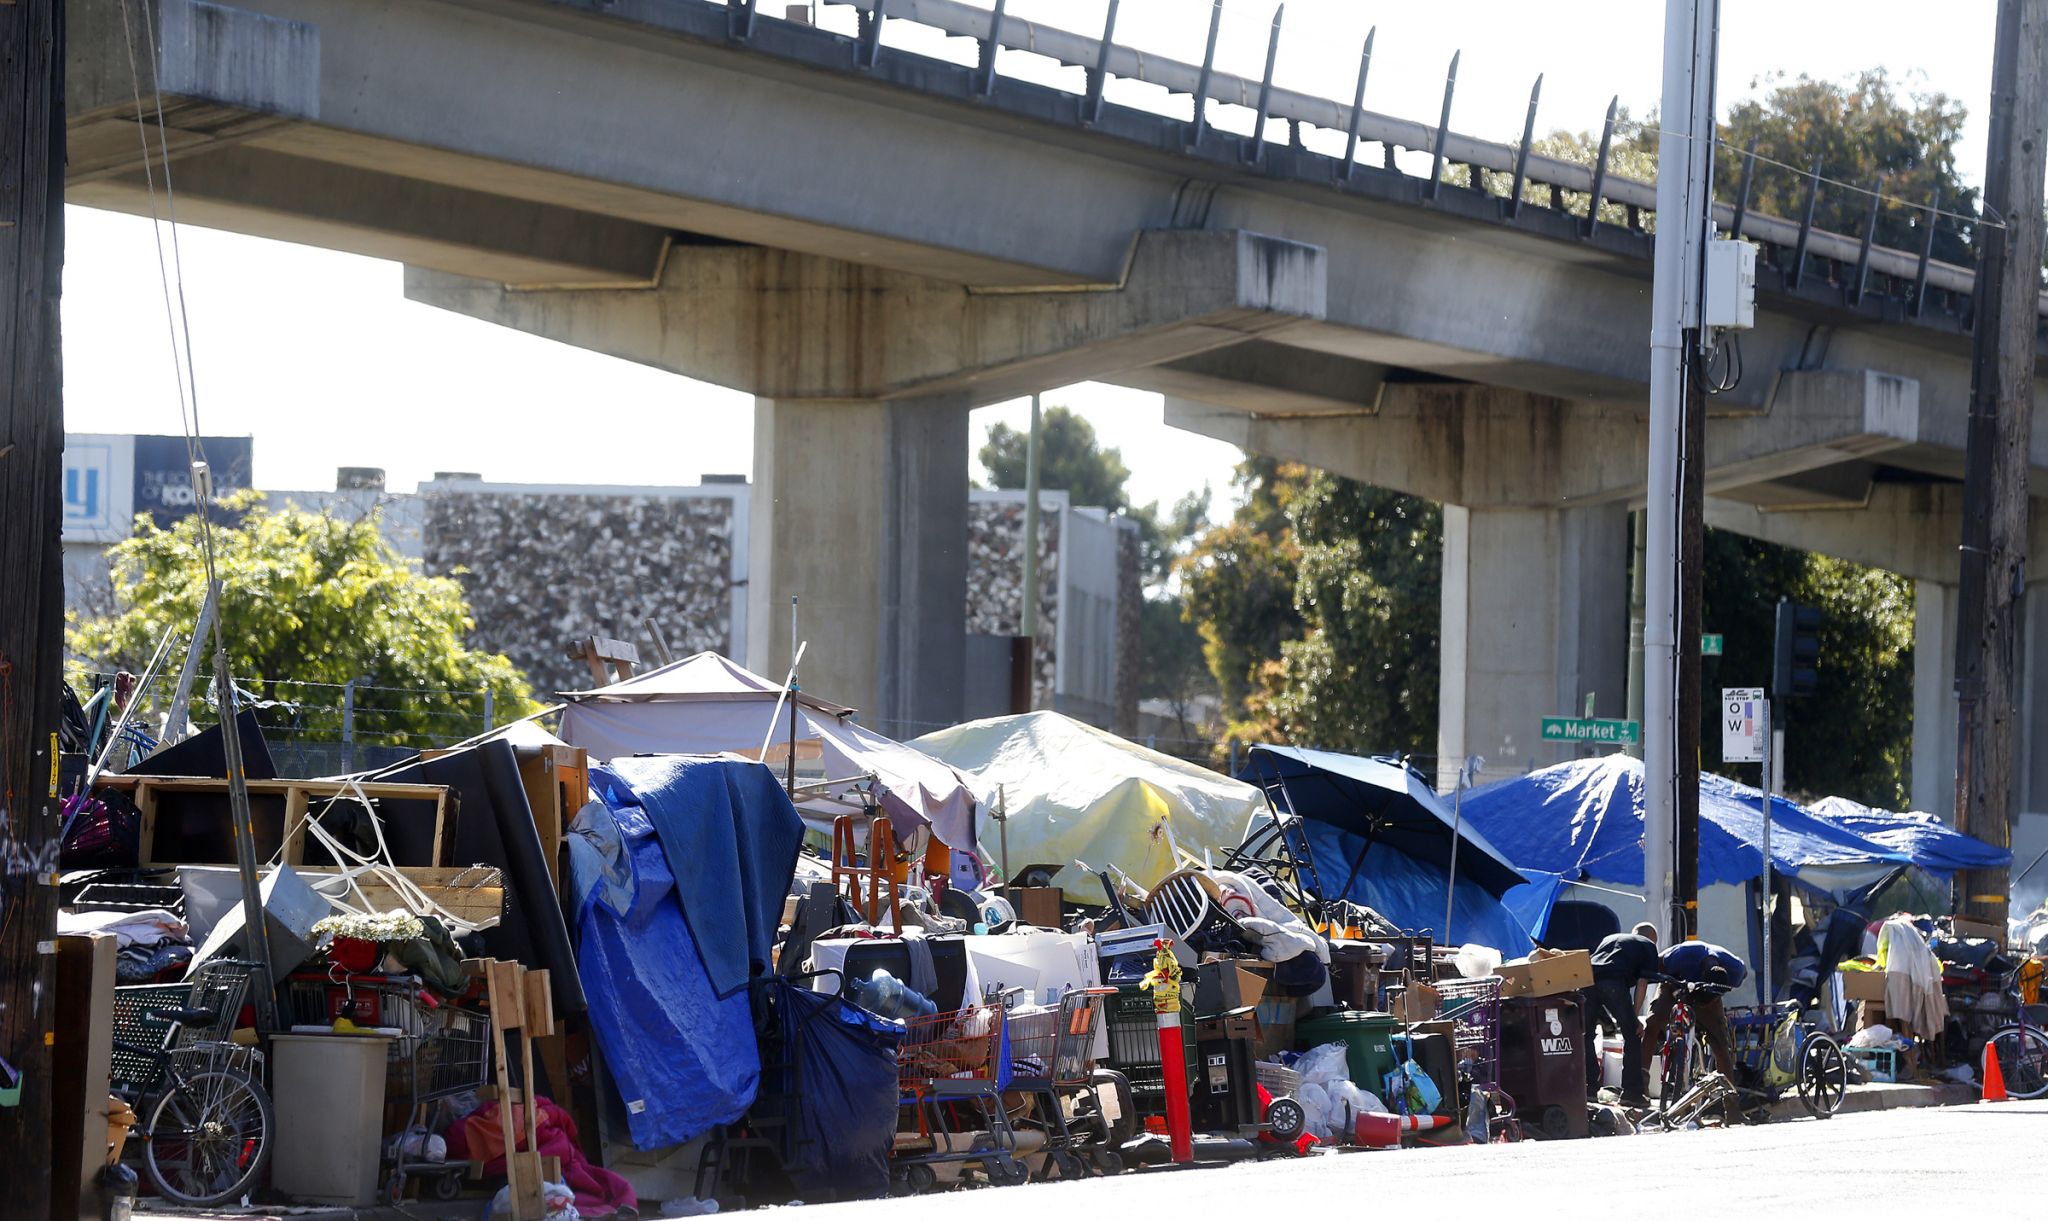 Make this group of people pay for California homelessness relief